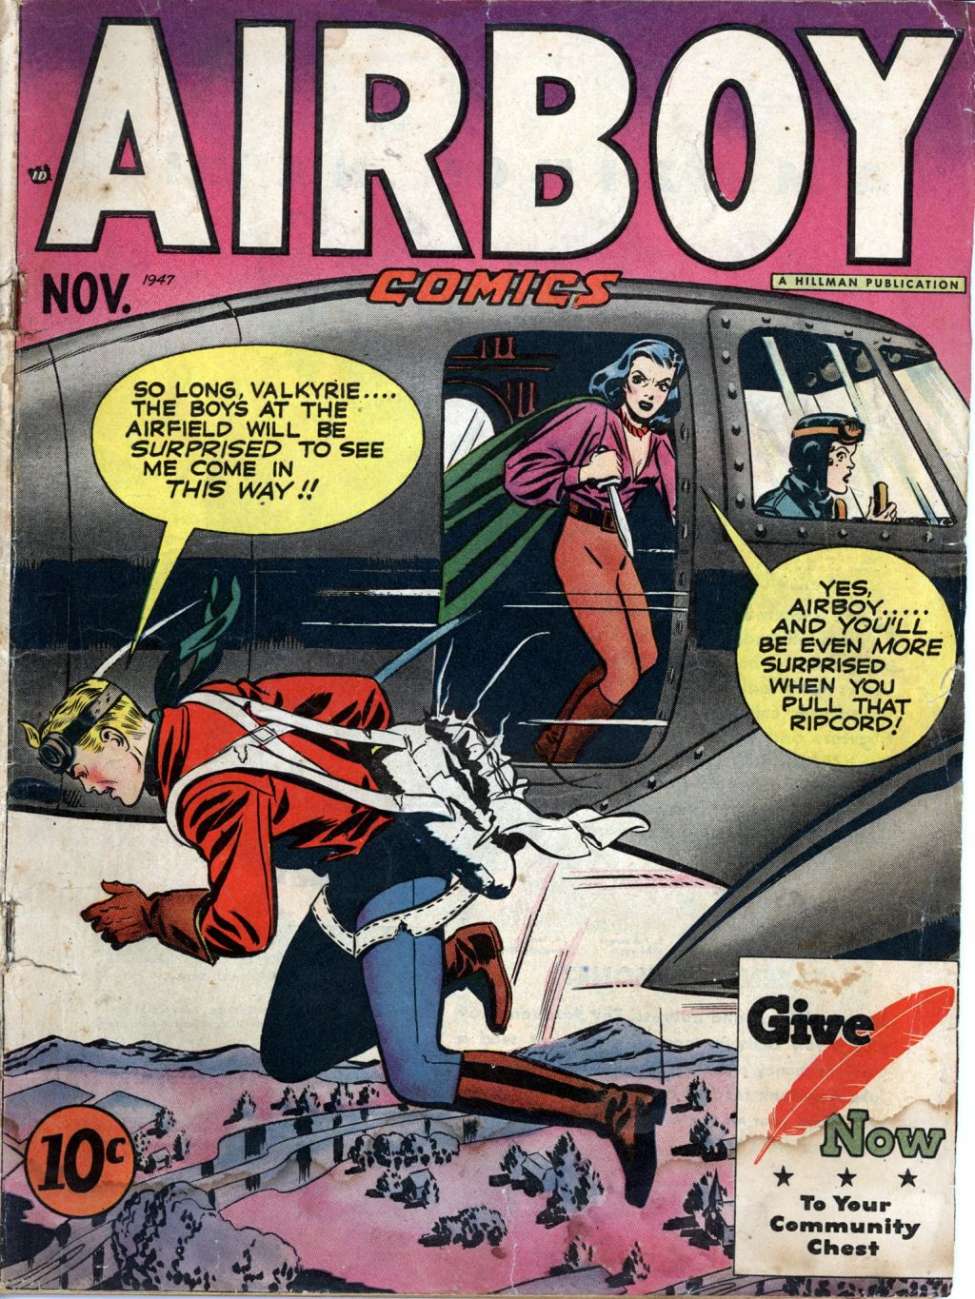 Book Cover For Airboy Archive Part 3